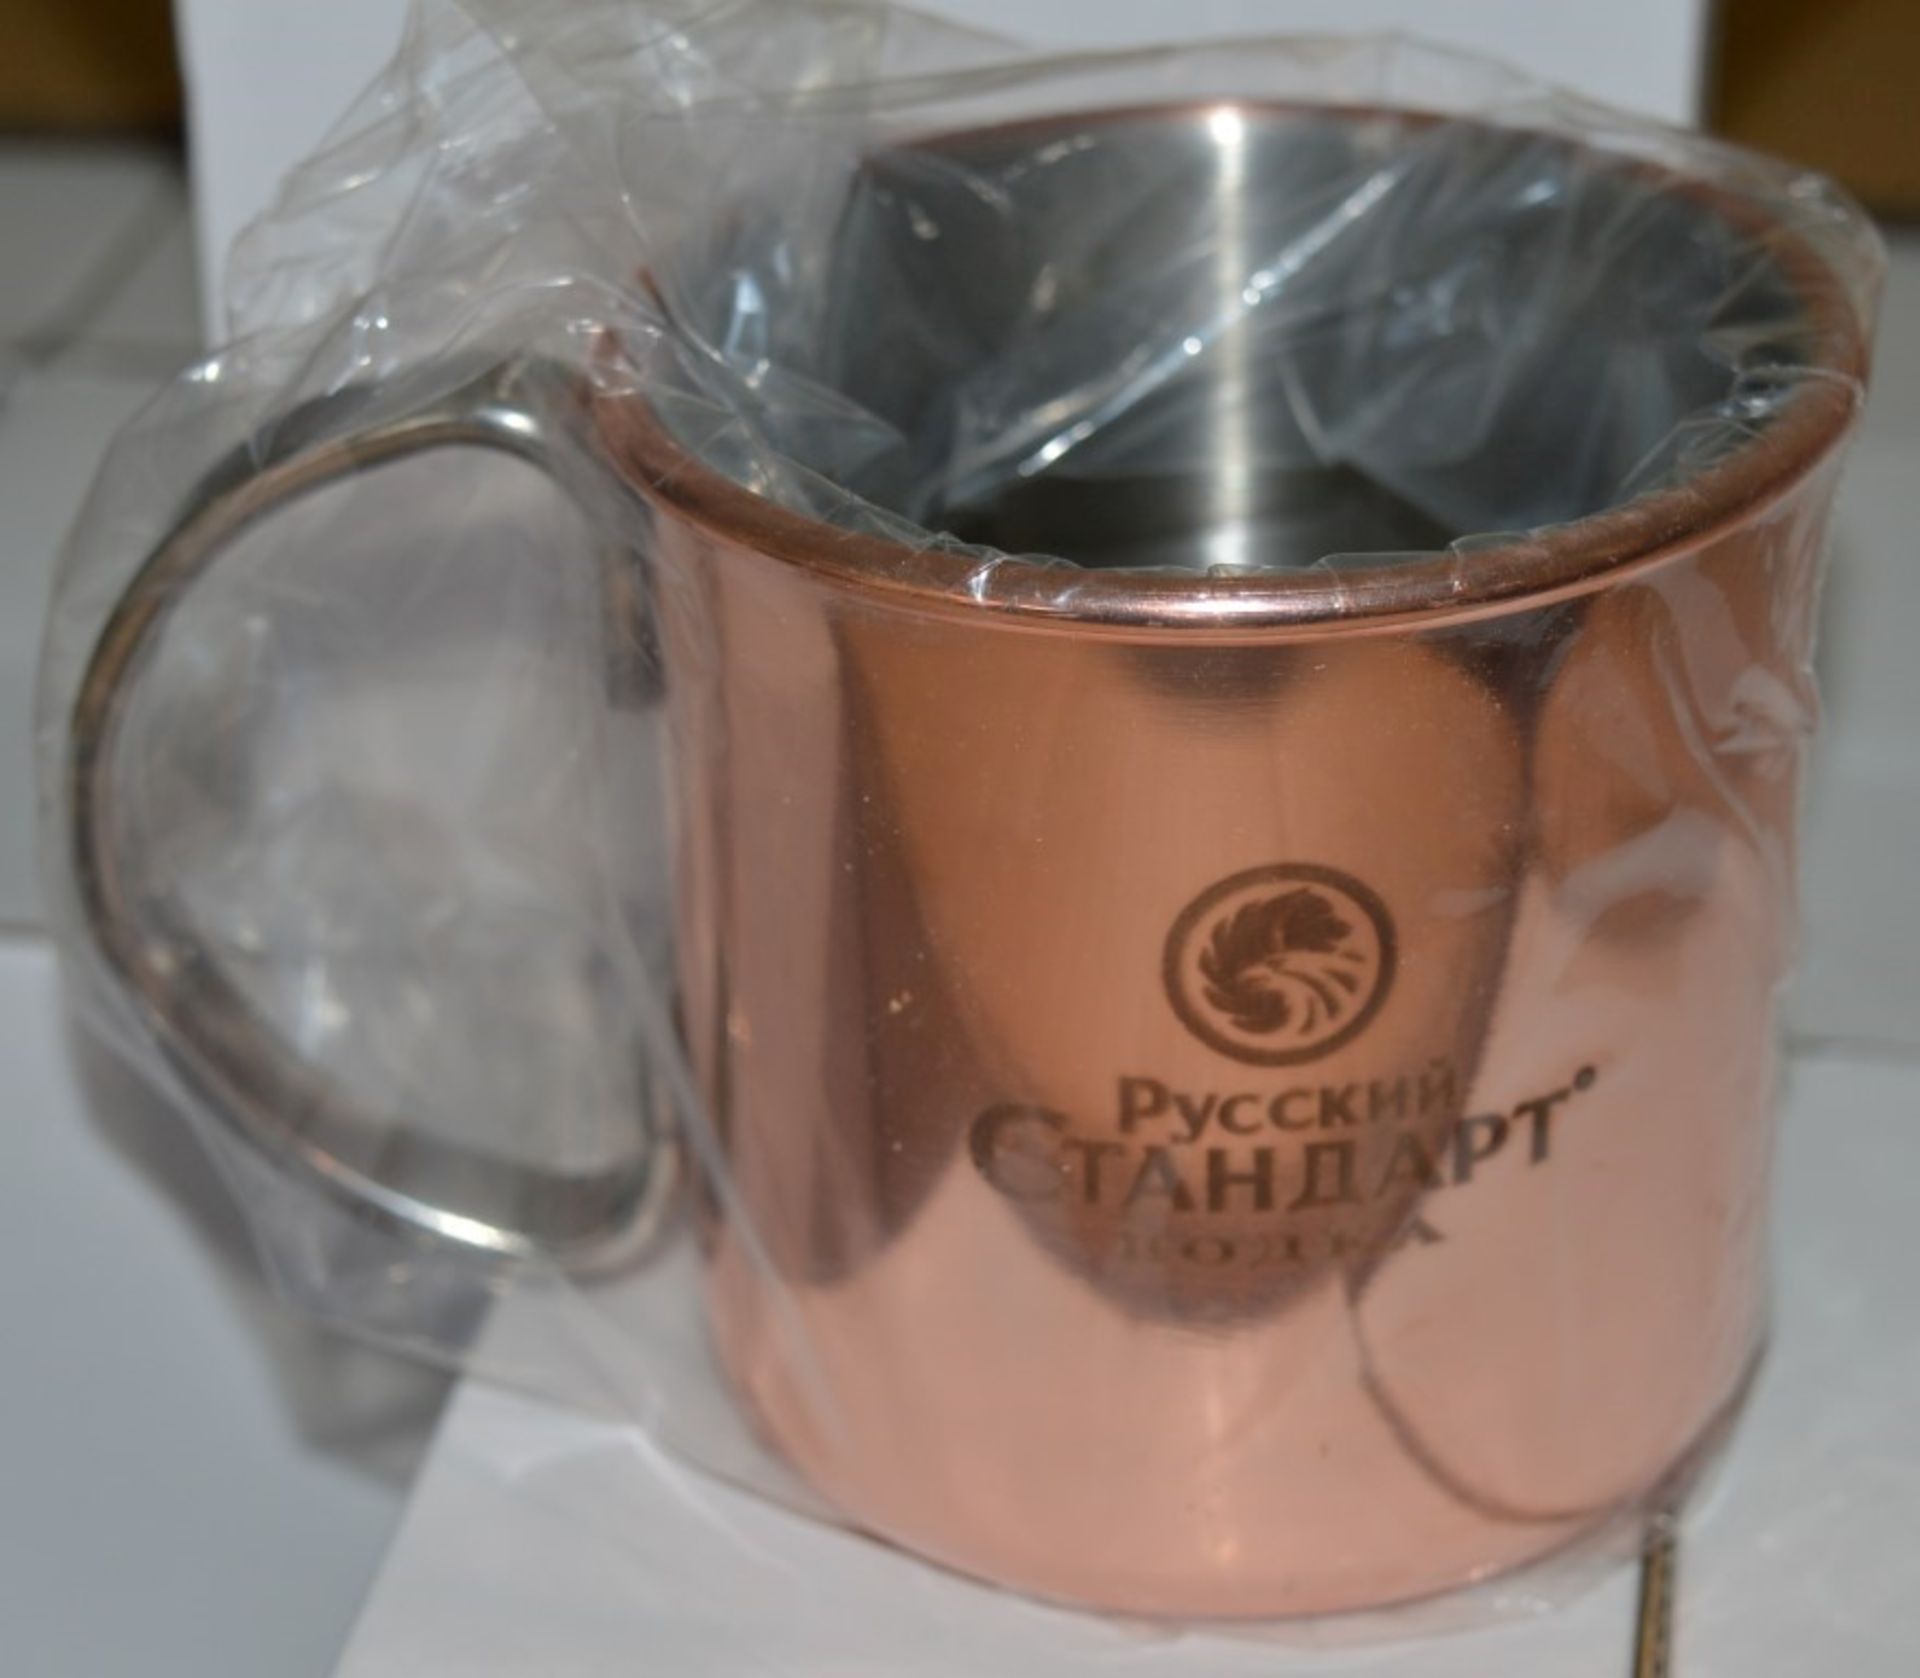 48 x Russian Standard Vodka Copper Mugs - Officially Used to Server Moscow Mule - Copper on the - Image 3 of 3